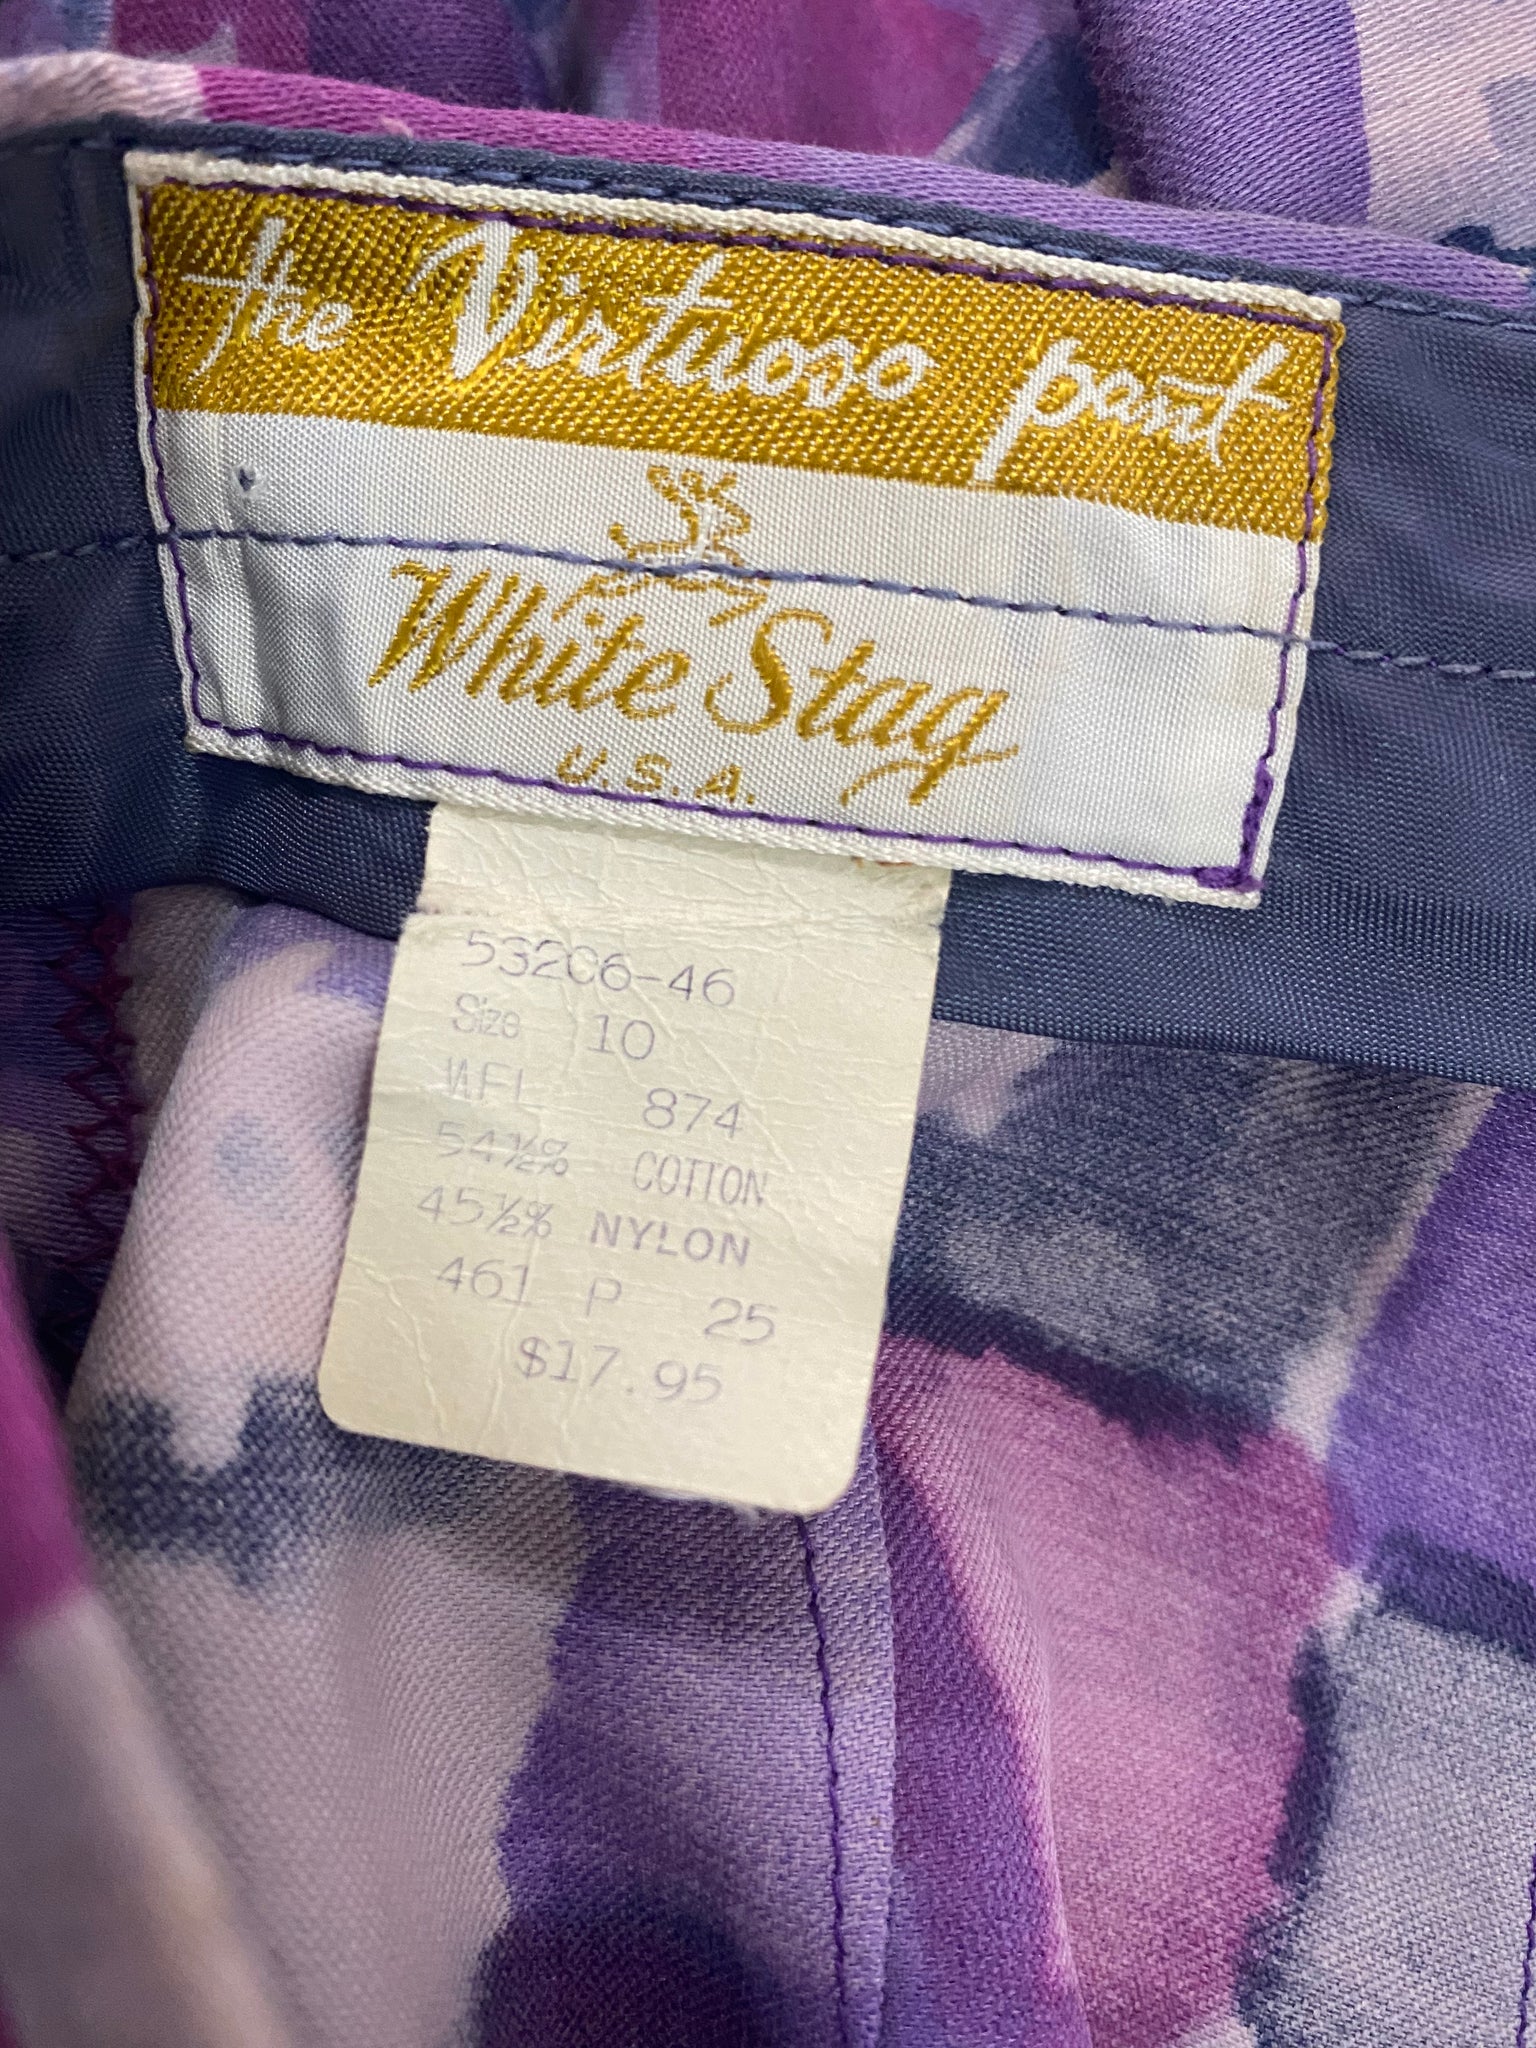   The Virtuoso Pant by White Stag 60s Purple Watercolor Print Apres Ski Pants LABEL 5 of 5